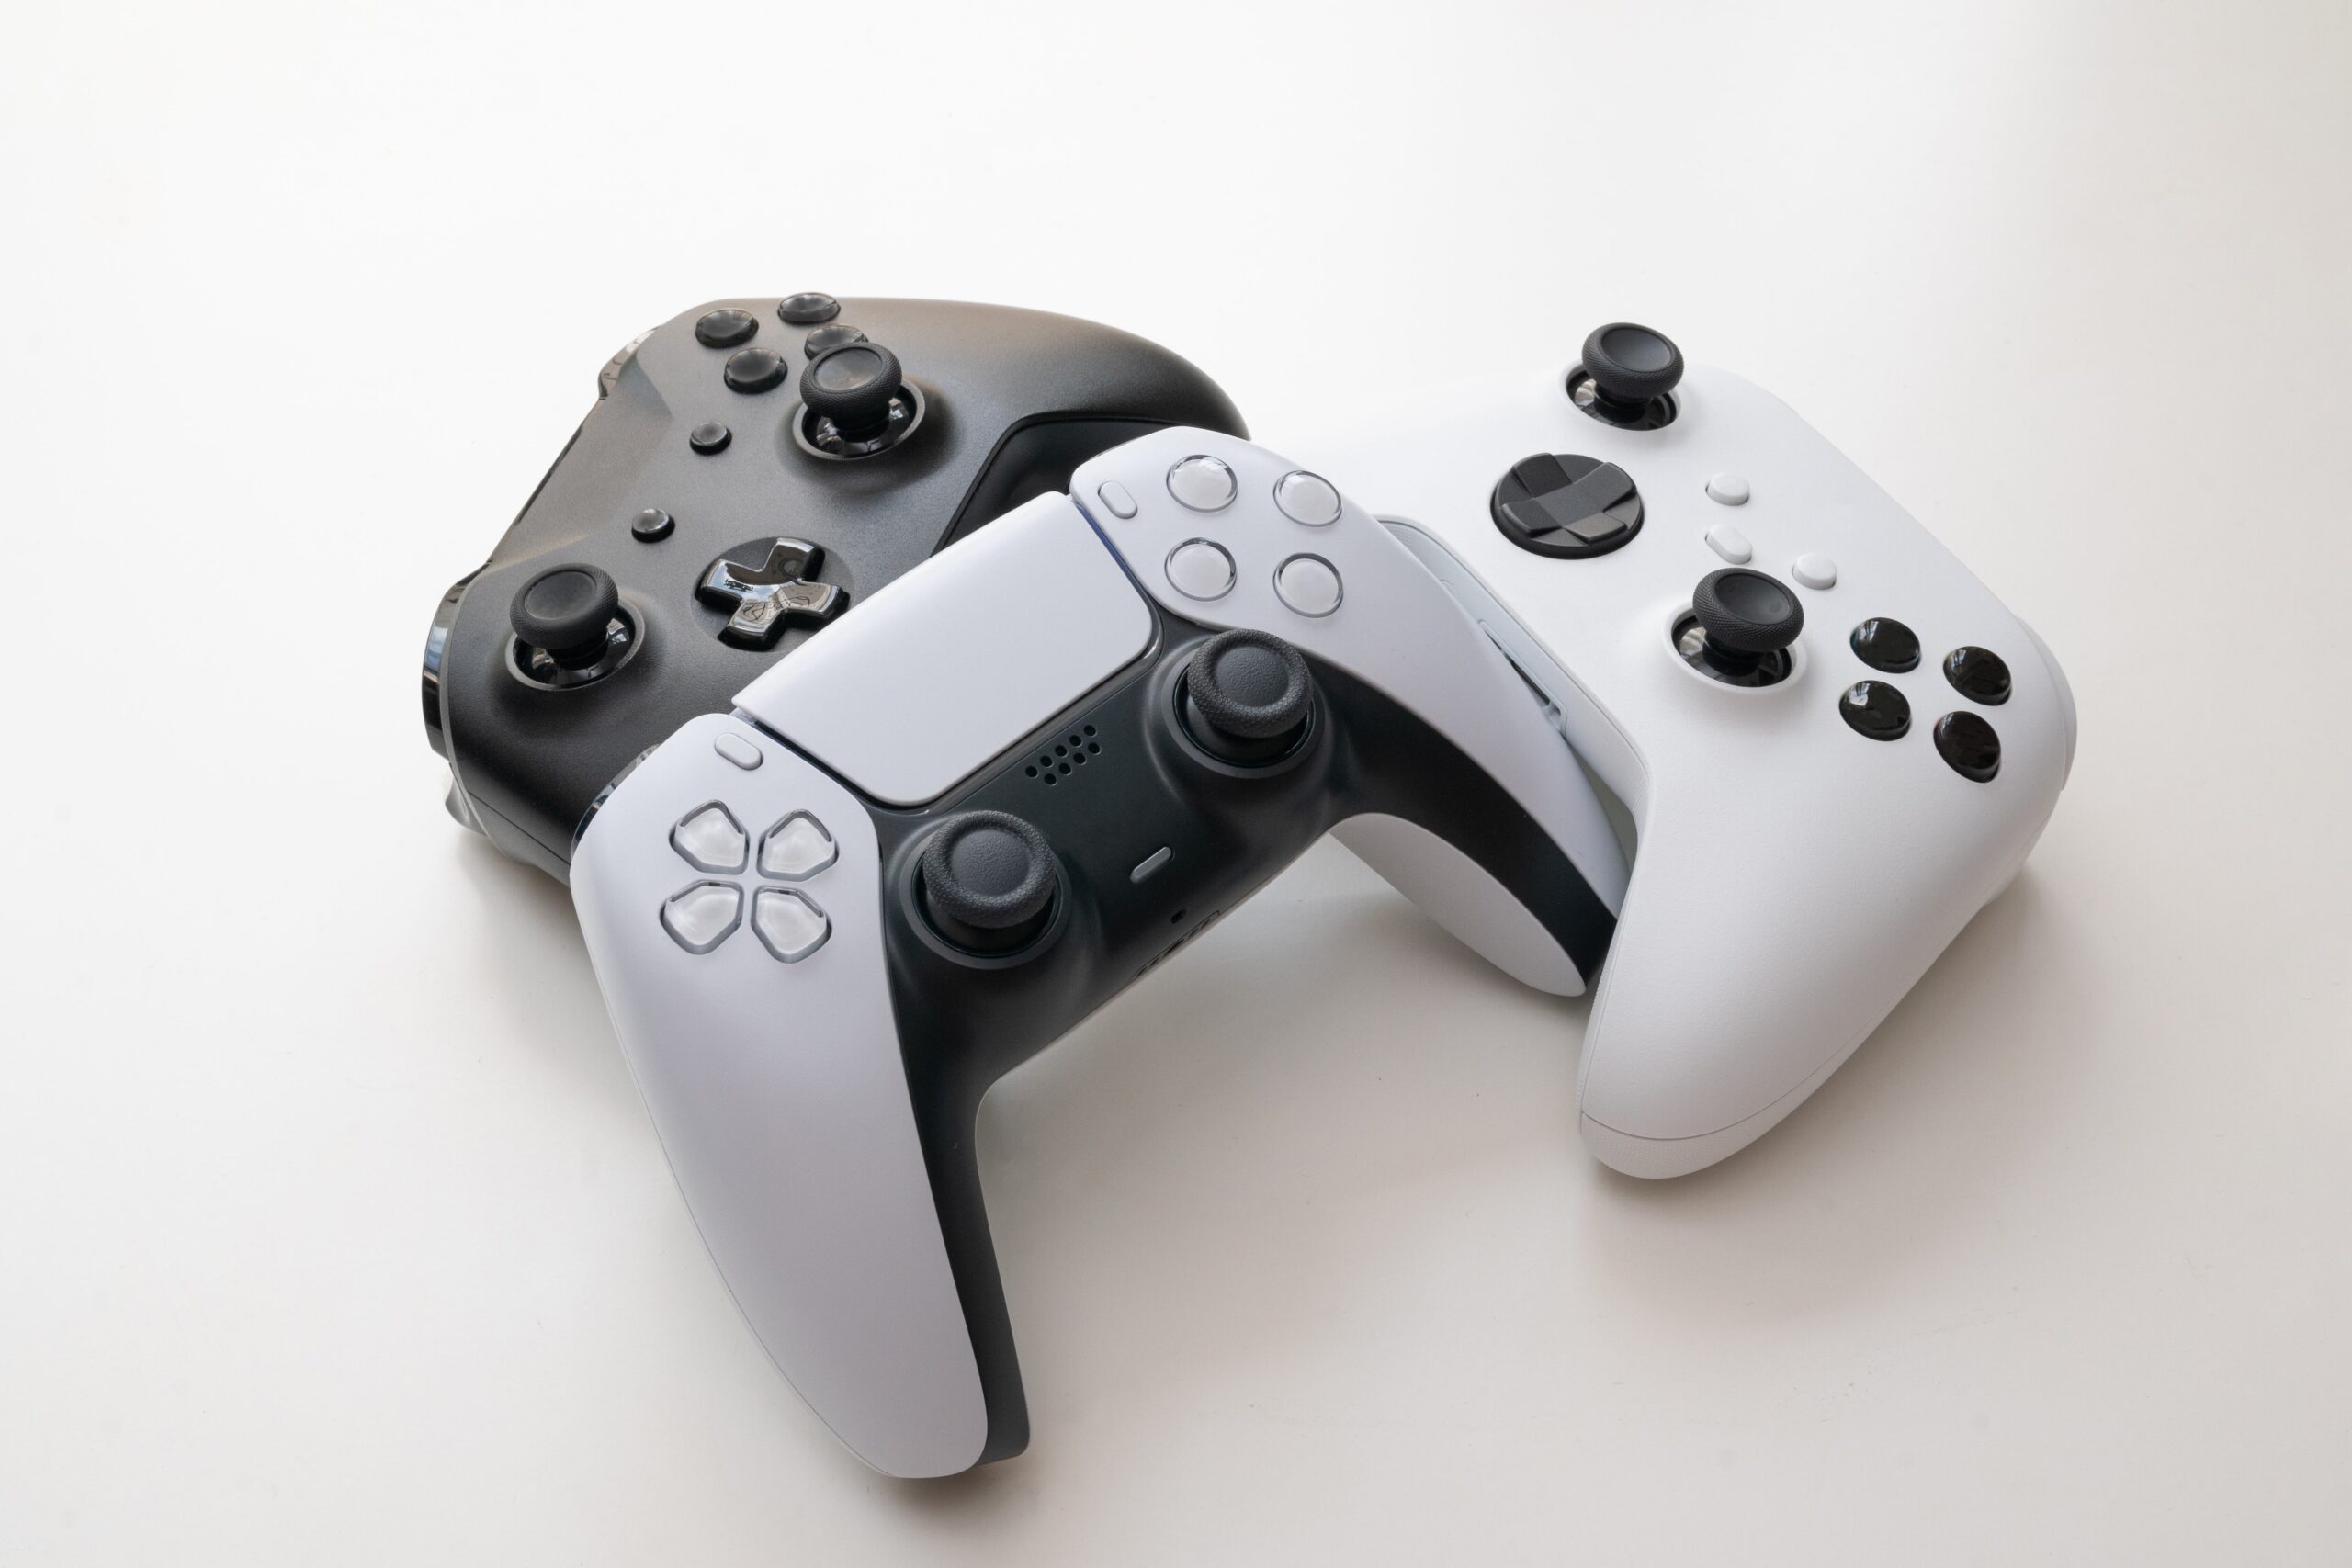 Can You Use an Xbox Controller on a Console Vice Versa? - GamersDirector